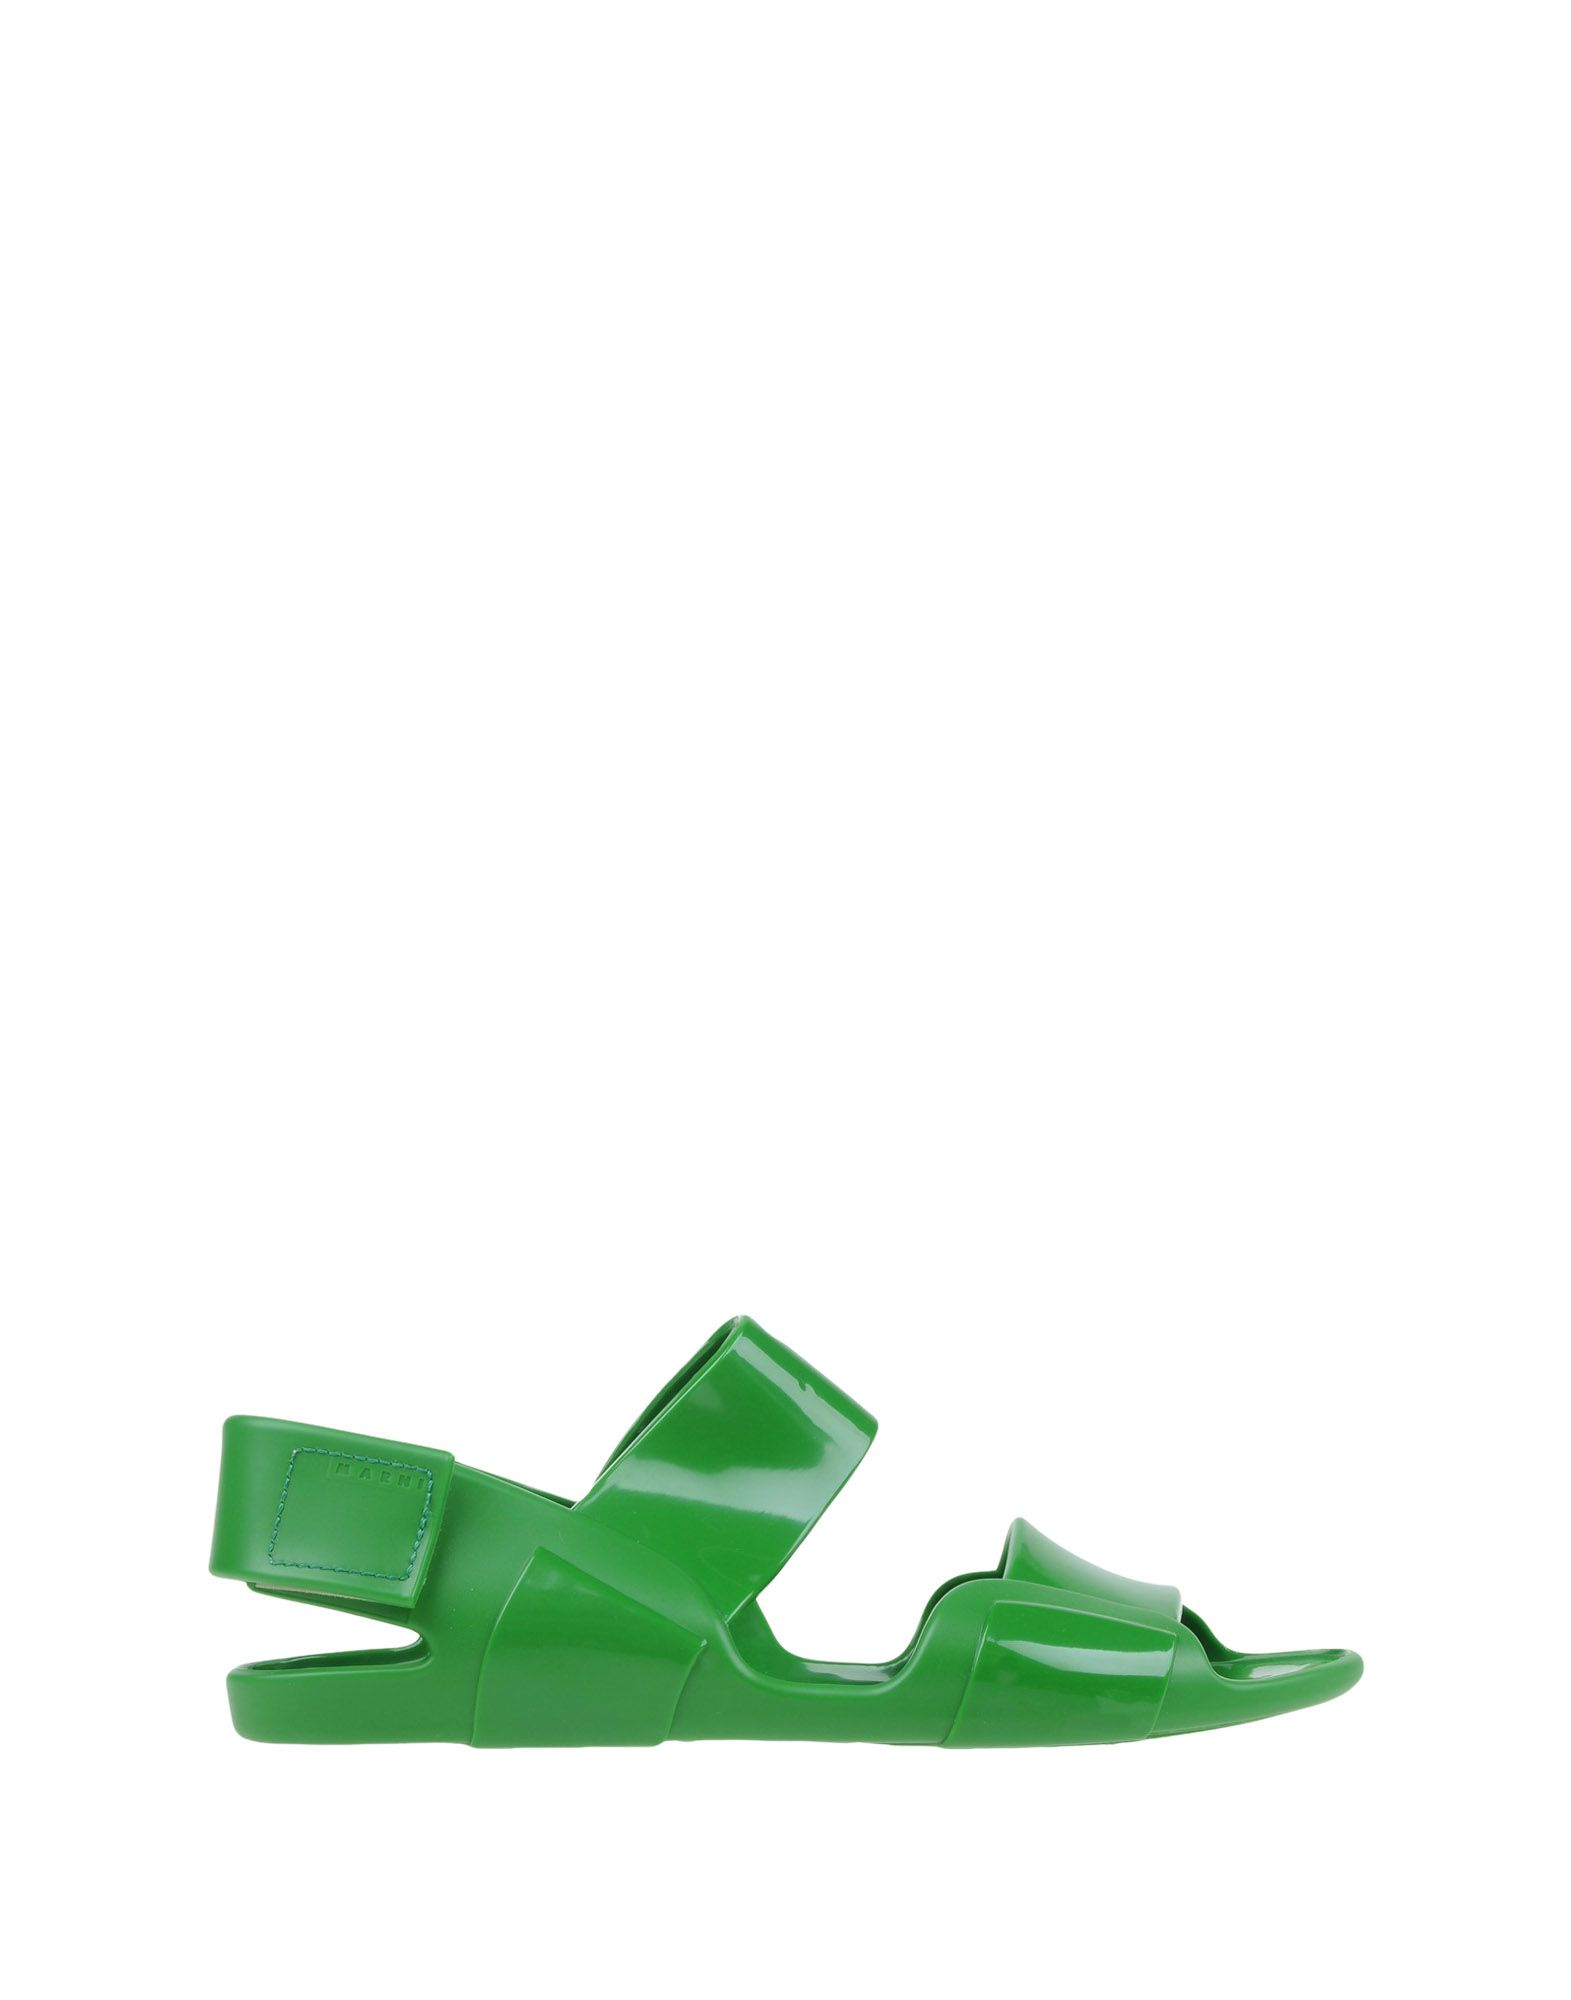 Lyst - Marni Rubber Slingback Sandals in Green